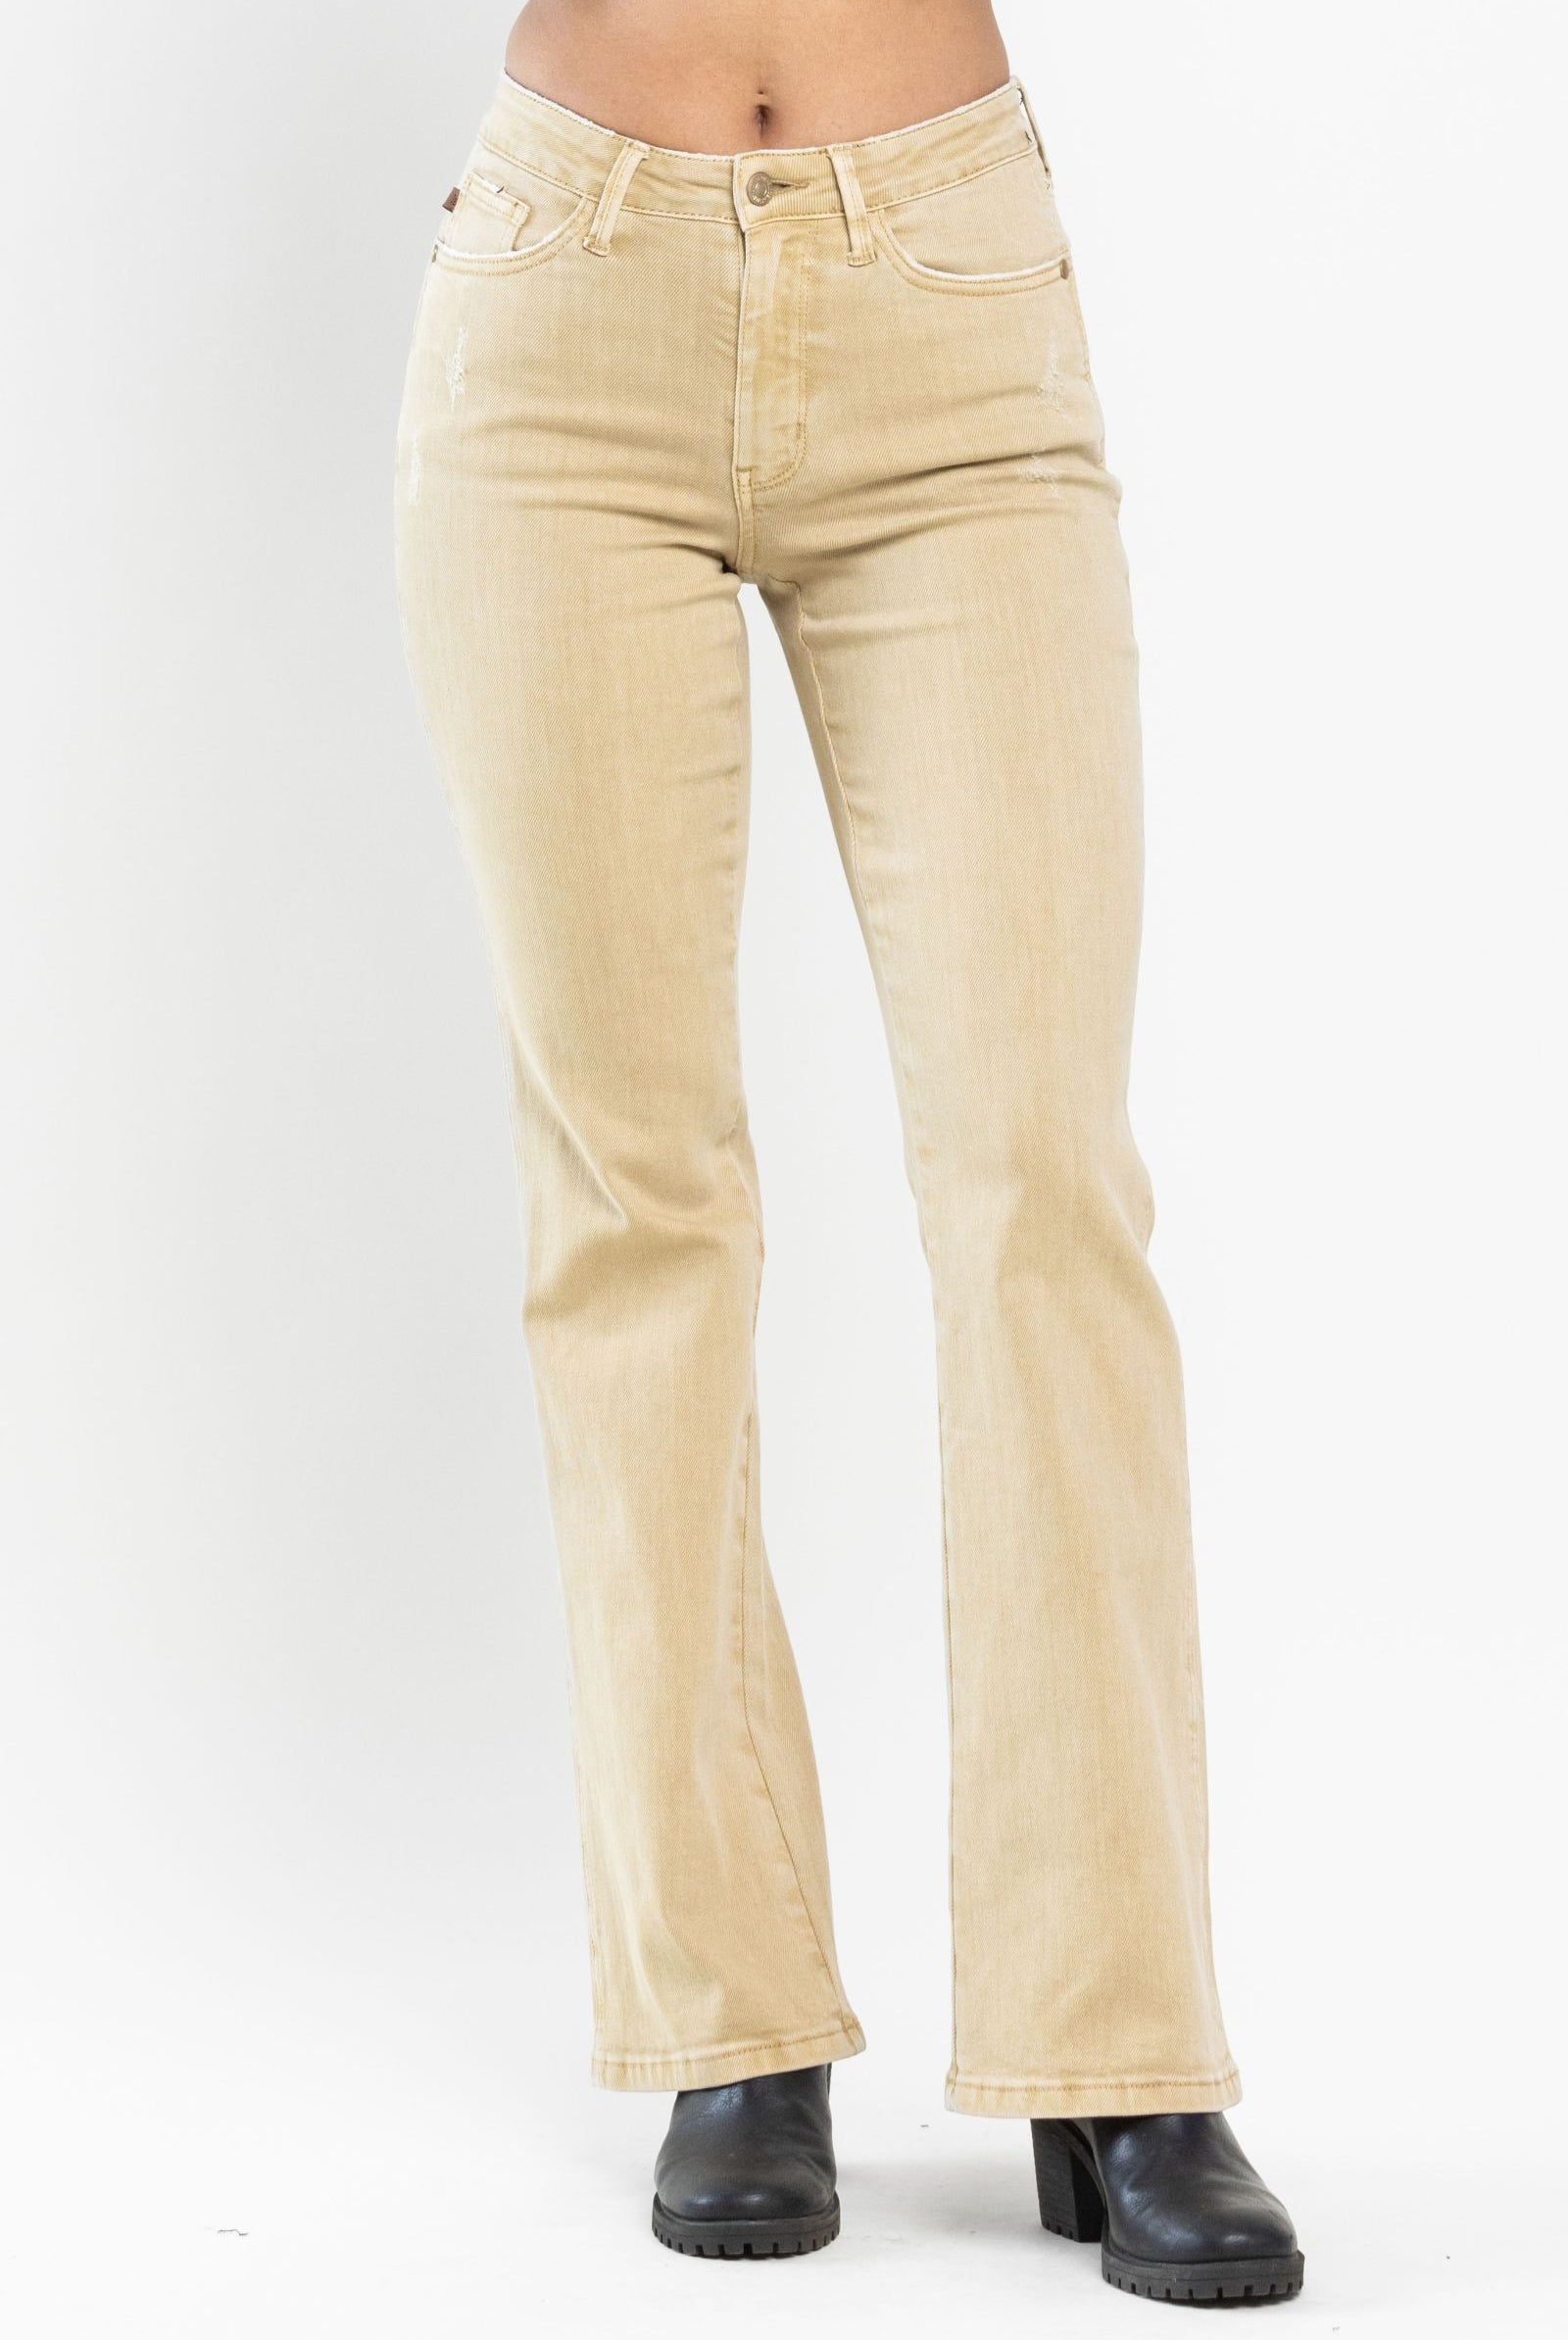 Judy Blue Khaki Slim Bootcut Jeans-200 Jeans- Simply Simpson's Boutique is a Women's Online Fashion Boutique Located in Jupiter, Florida